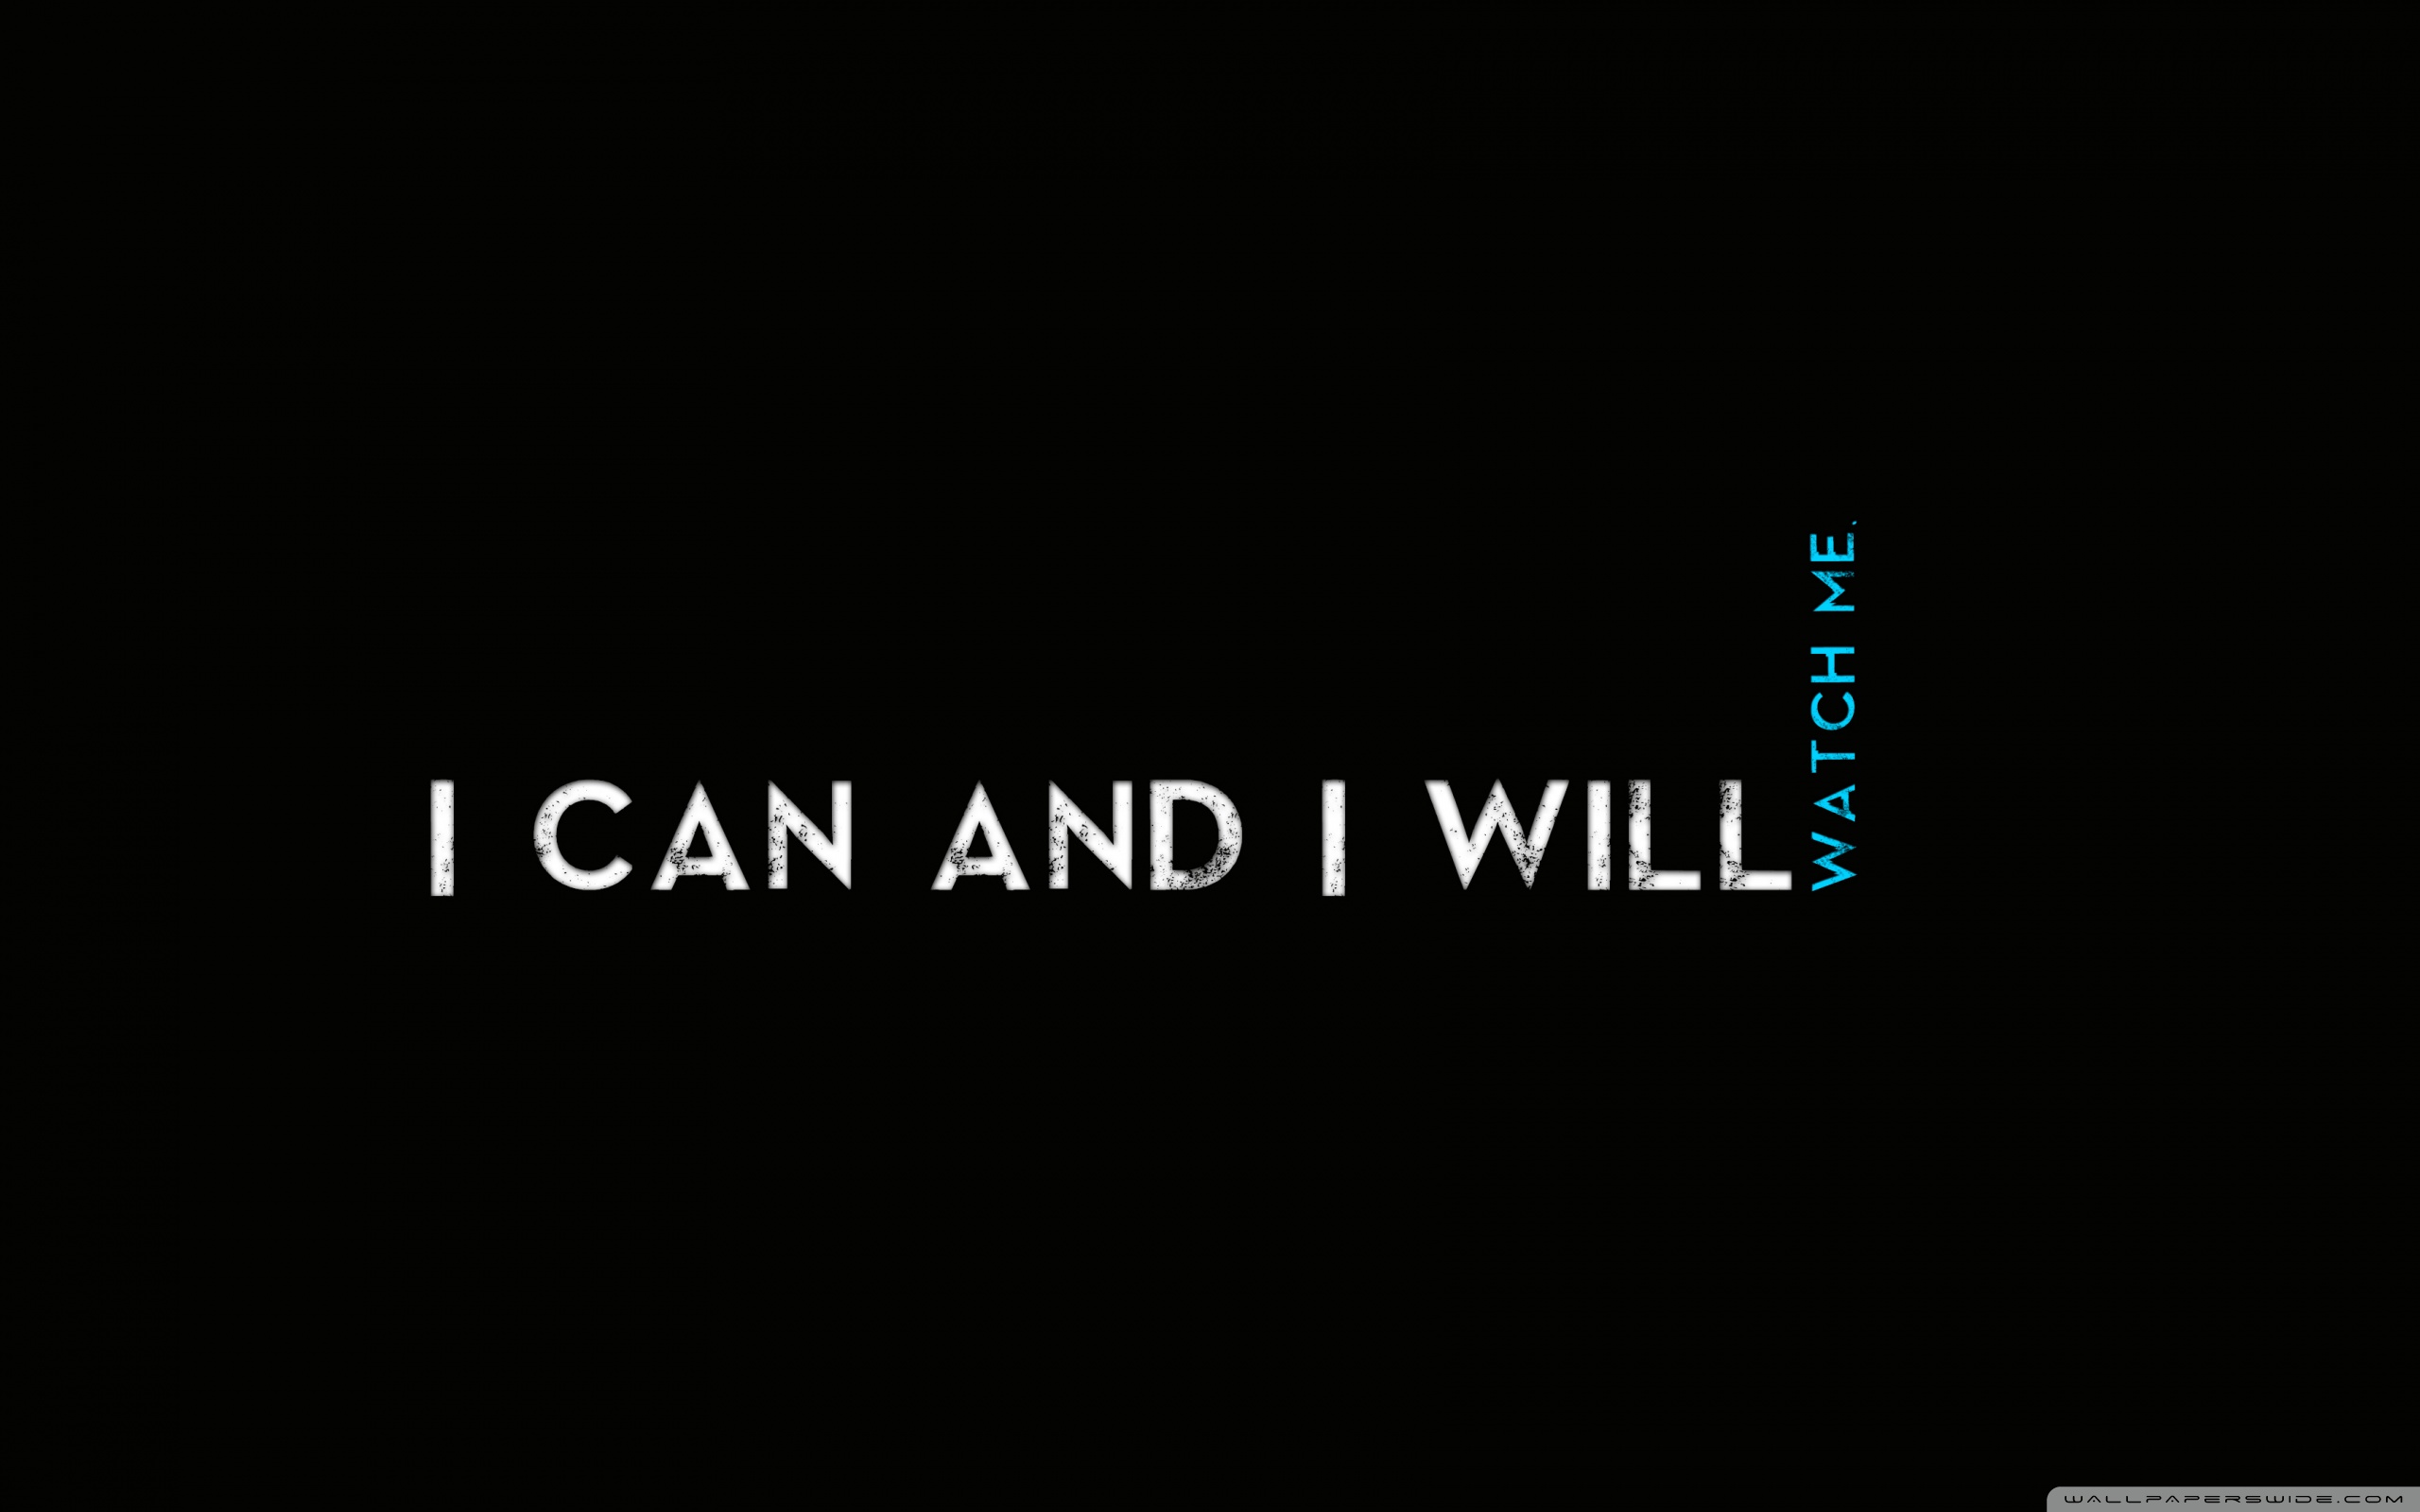 Quotes I Can And I Will Ultra Hd Desktop Background Wallpaper For 4k Uhd Tv Widescreen Ultrawide Desktop Laptop Multi Display Dual Monitor Tablet Smartphone